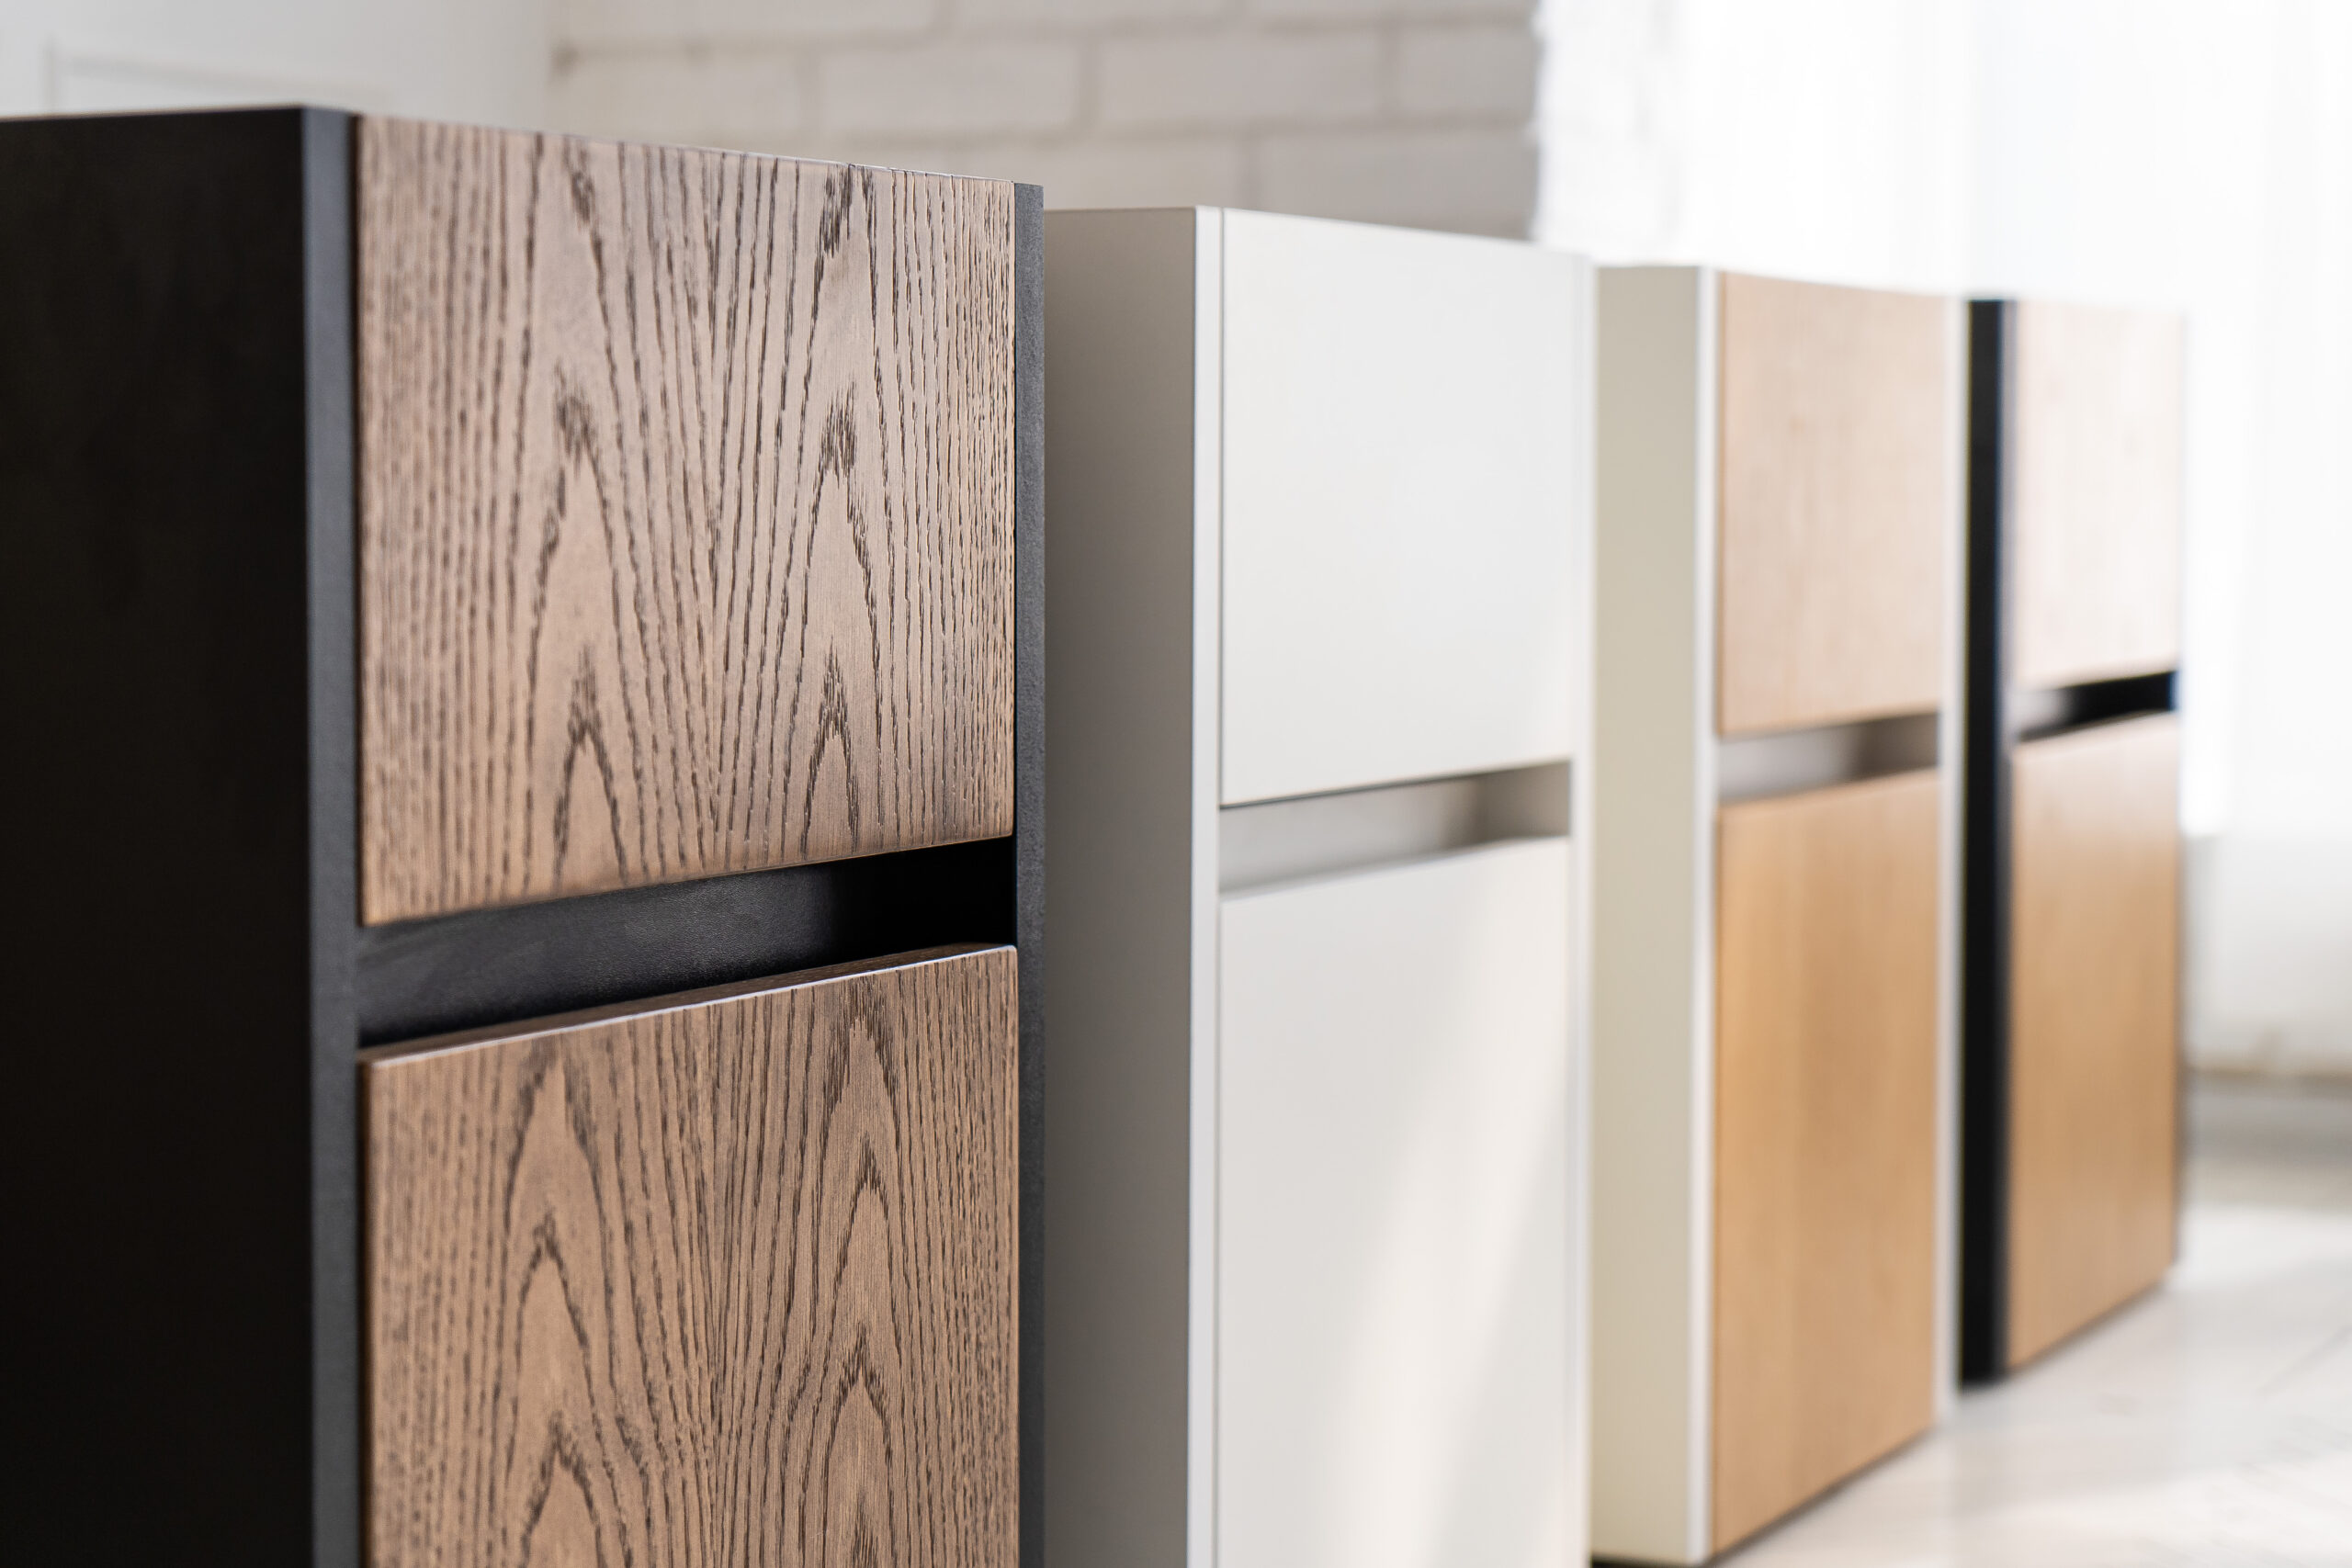 A row of cabinet drawers with laminate finish in various patterns